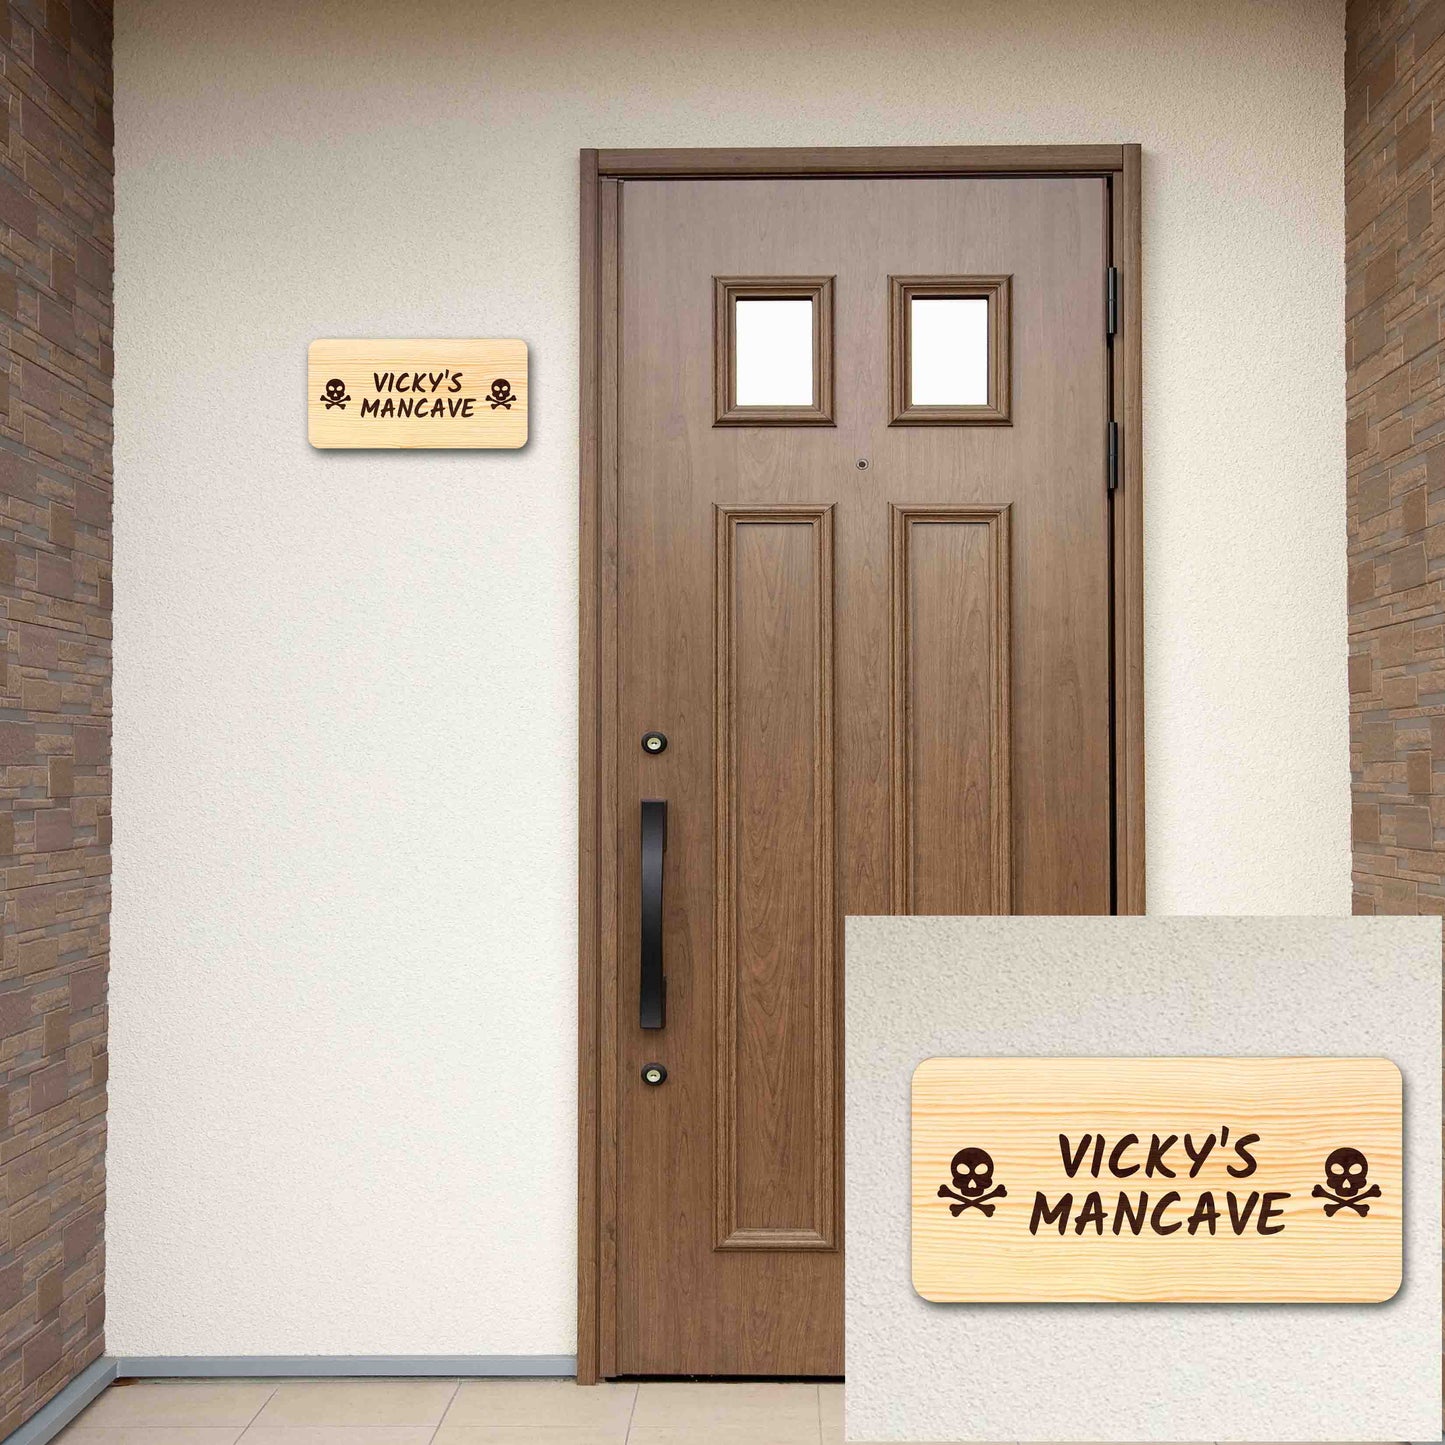 Funny Door Signs for Home Personalized Wooden Nameplate - Man Cave